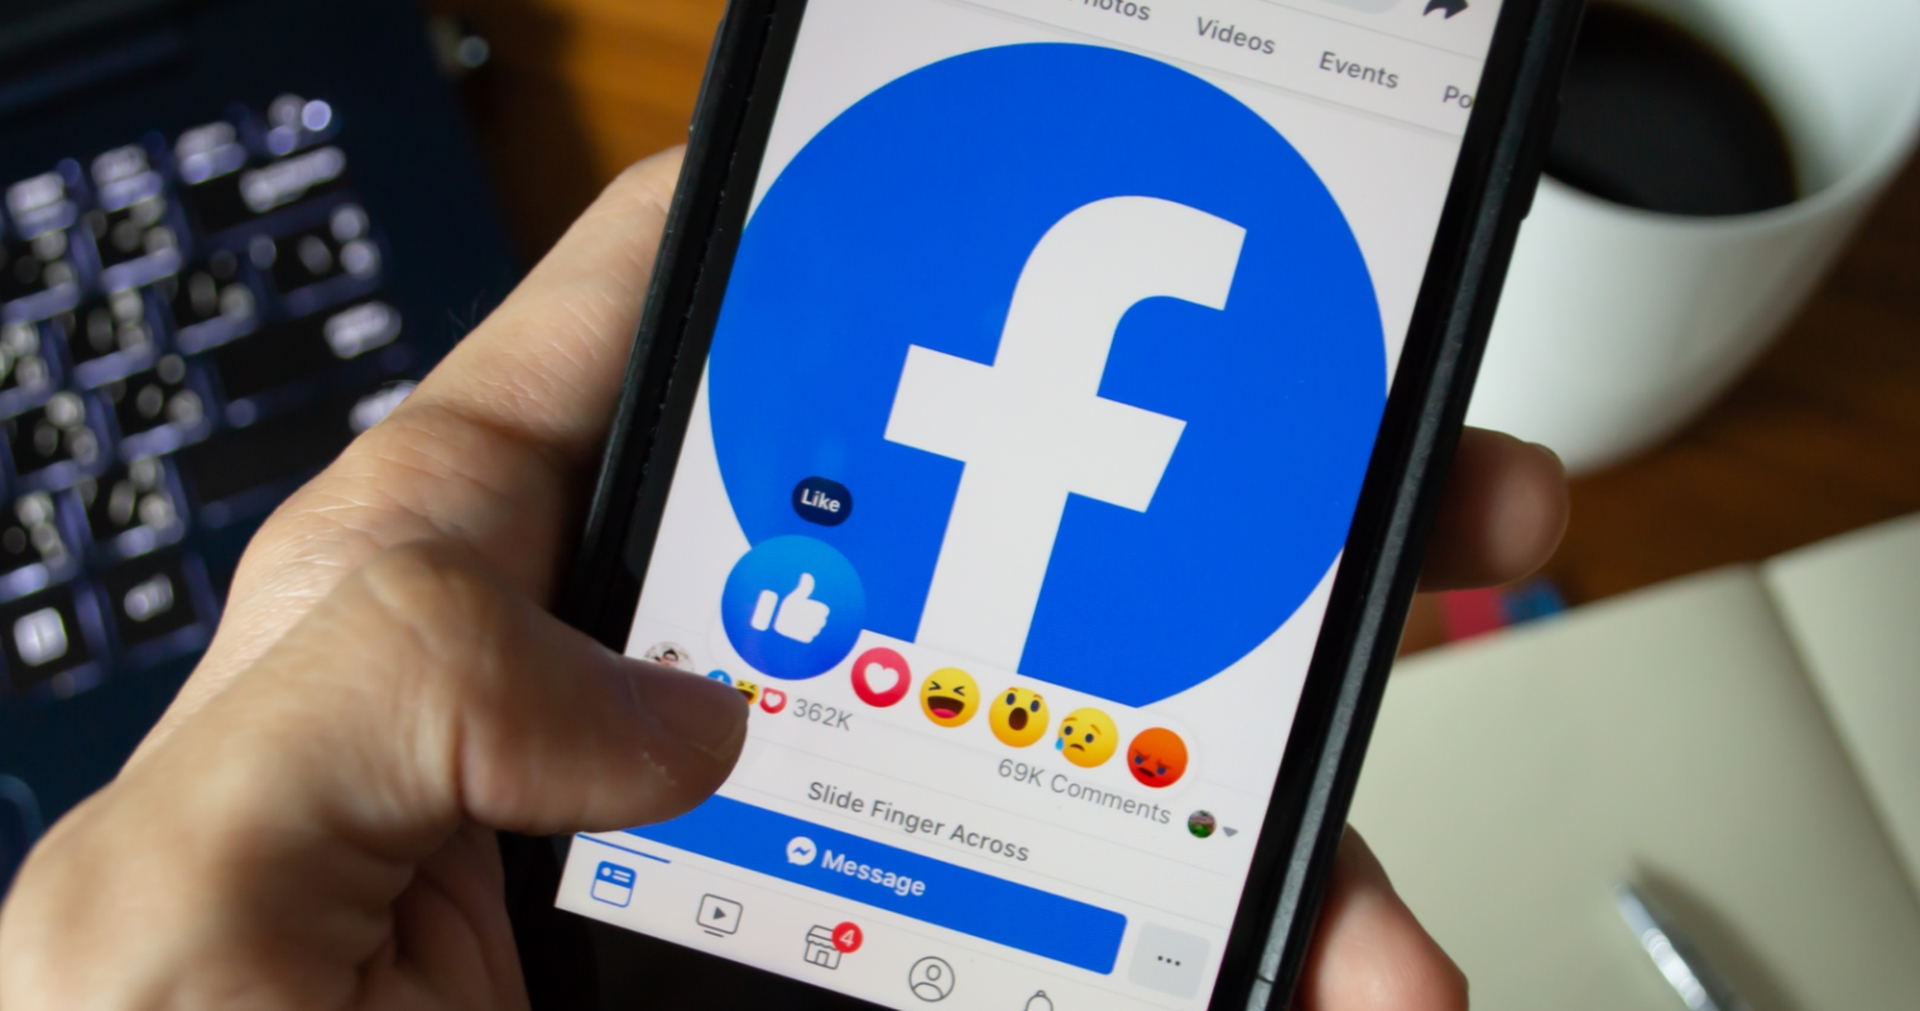 In this article, we are going to go over why is Facebook lagging on my laptop, as well as the possible solutions so you can enjoy the social media platform without issues.